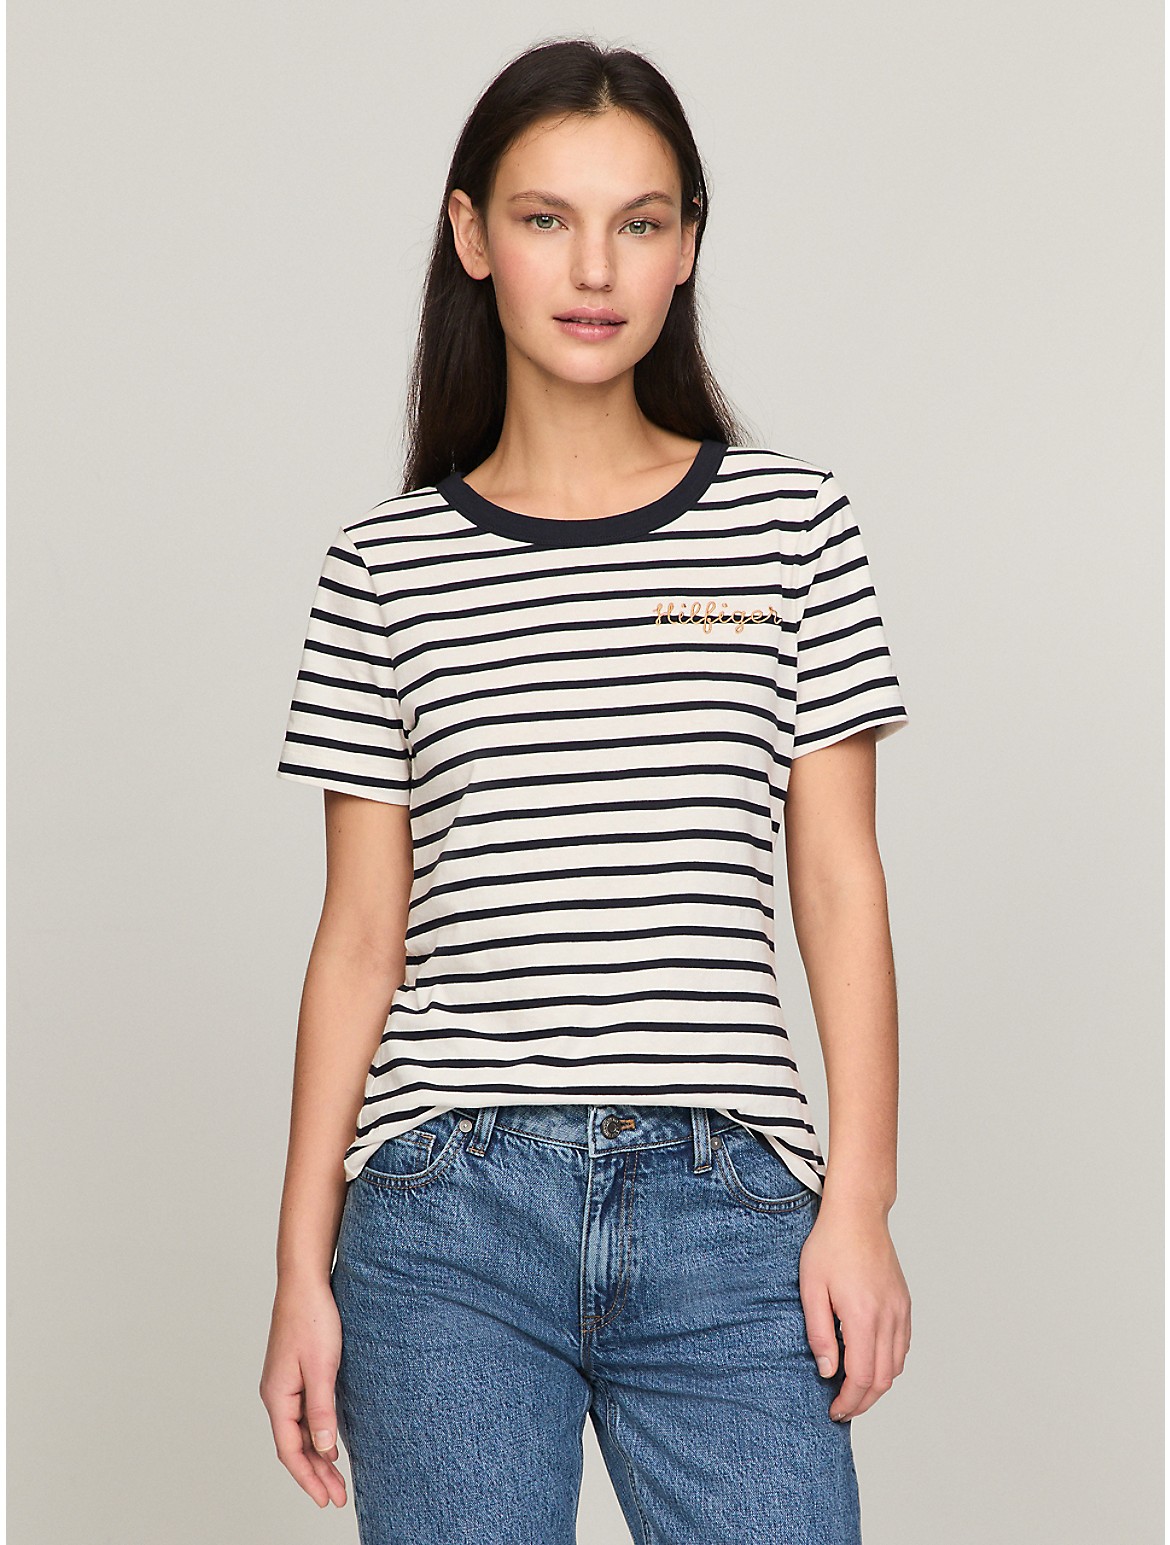 Tommy Hilfiger Women's Slim Fit Embroidered Rope Stripe T-Shirt